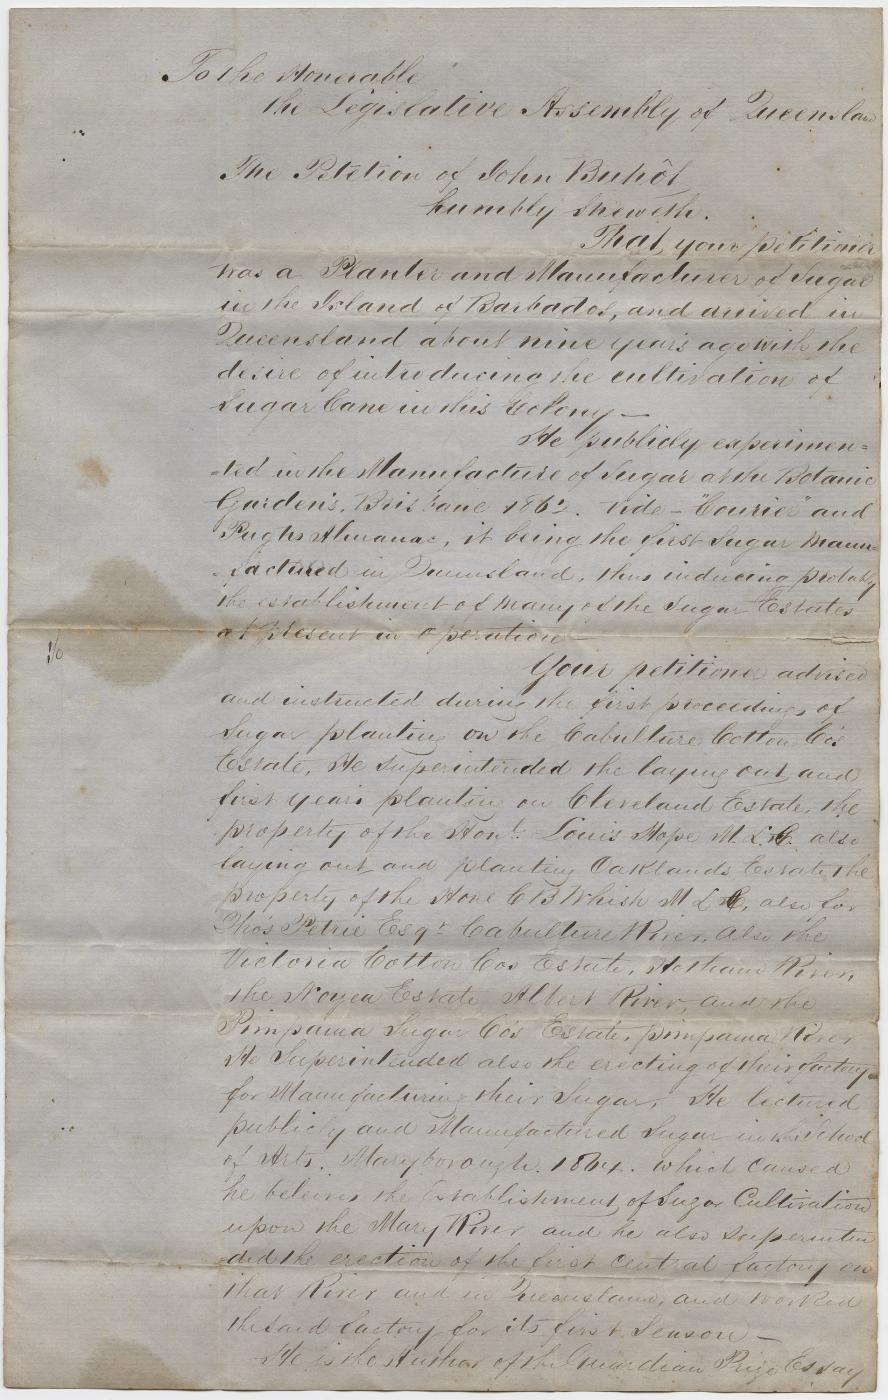 Petition from John Buhot to the Legislative Assembly for a Grant of Land for his services to the sugar industry